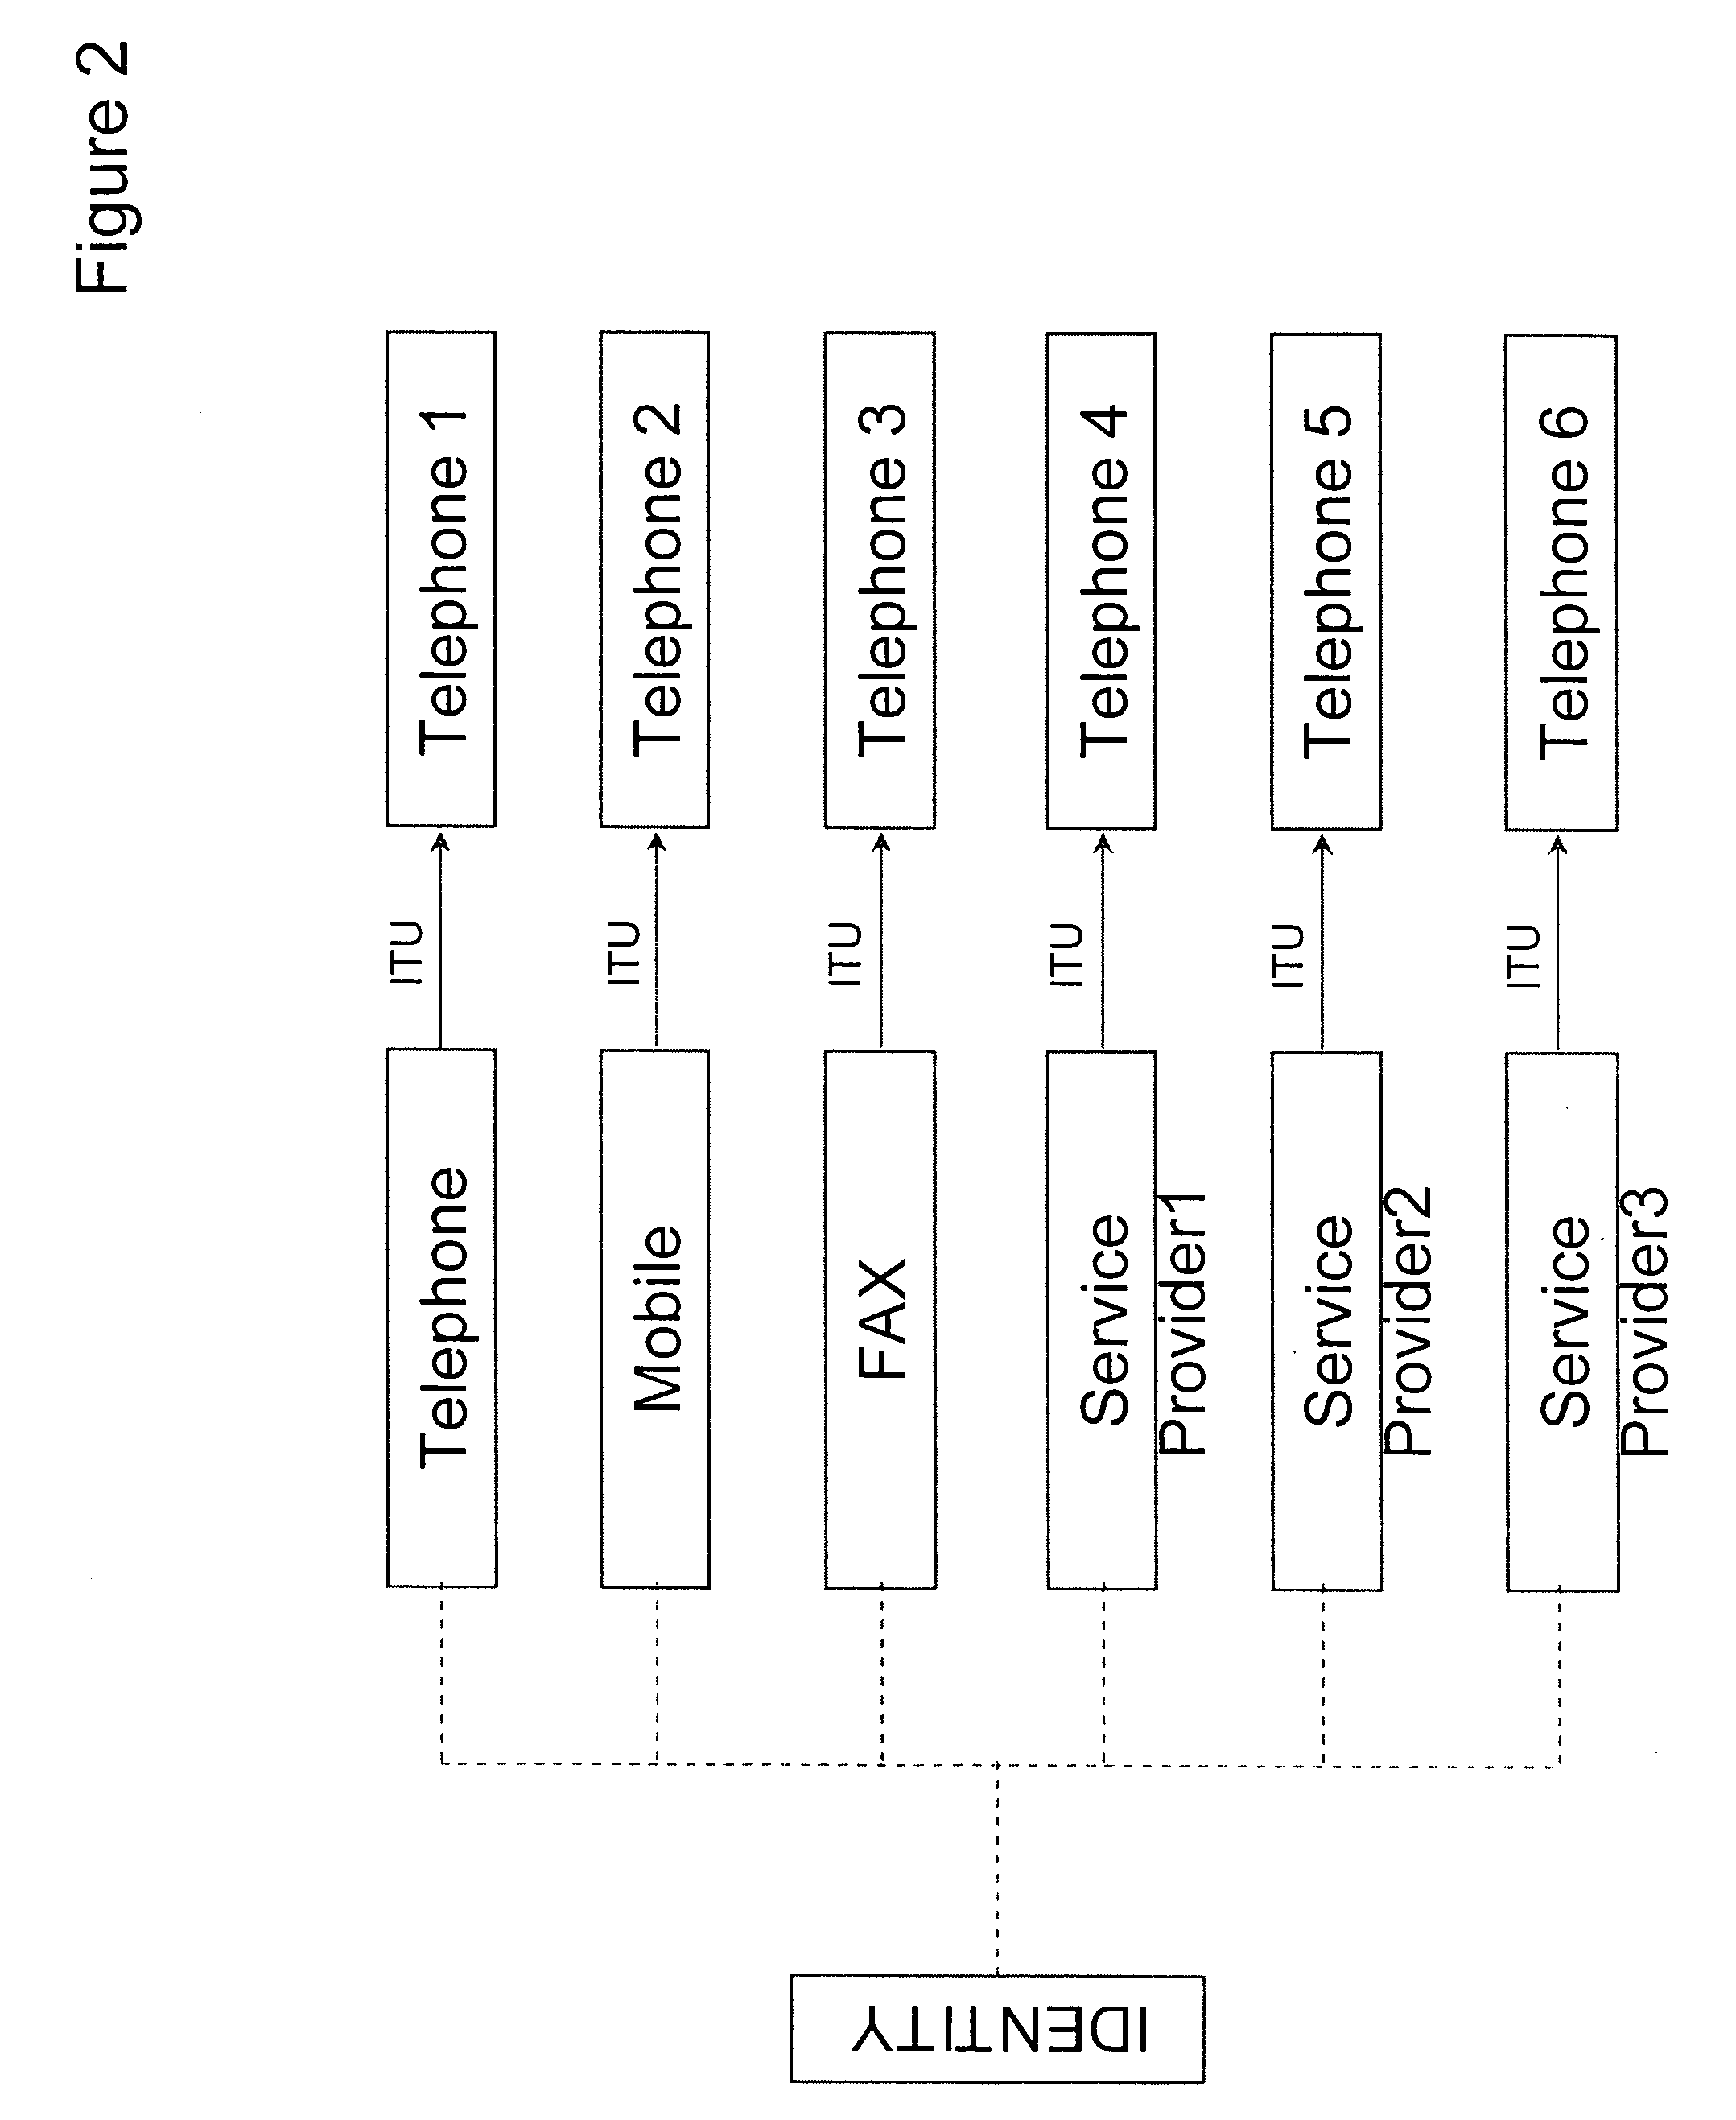 System and method to control transactions on communication channels based on universal identifiers